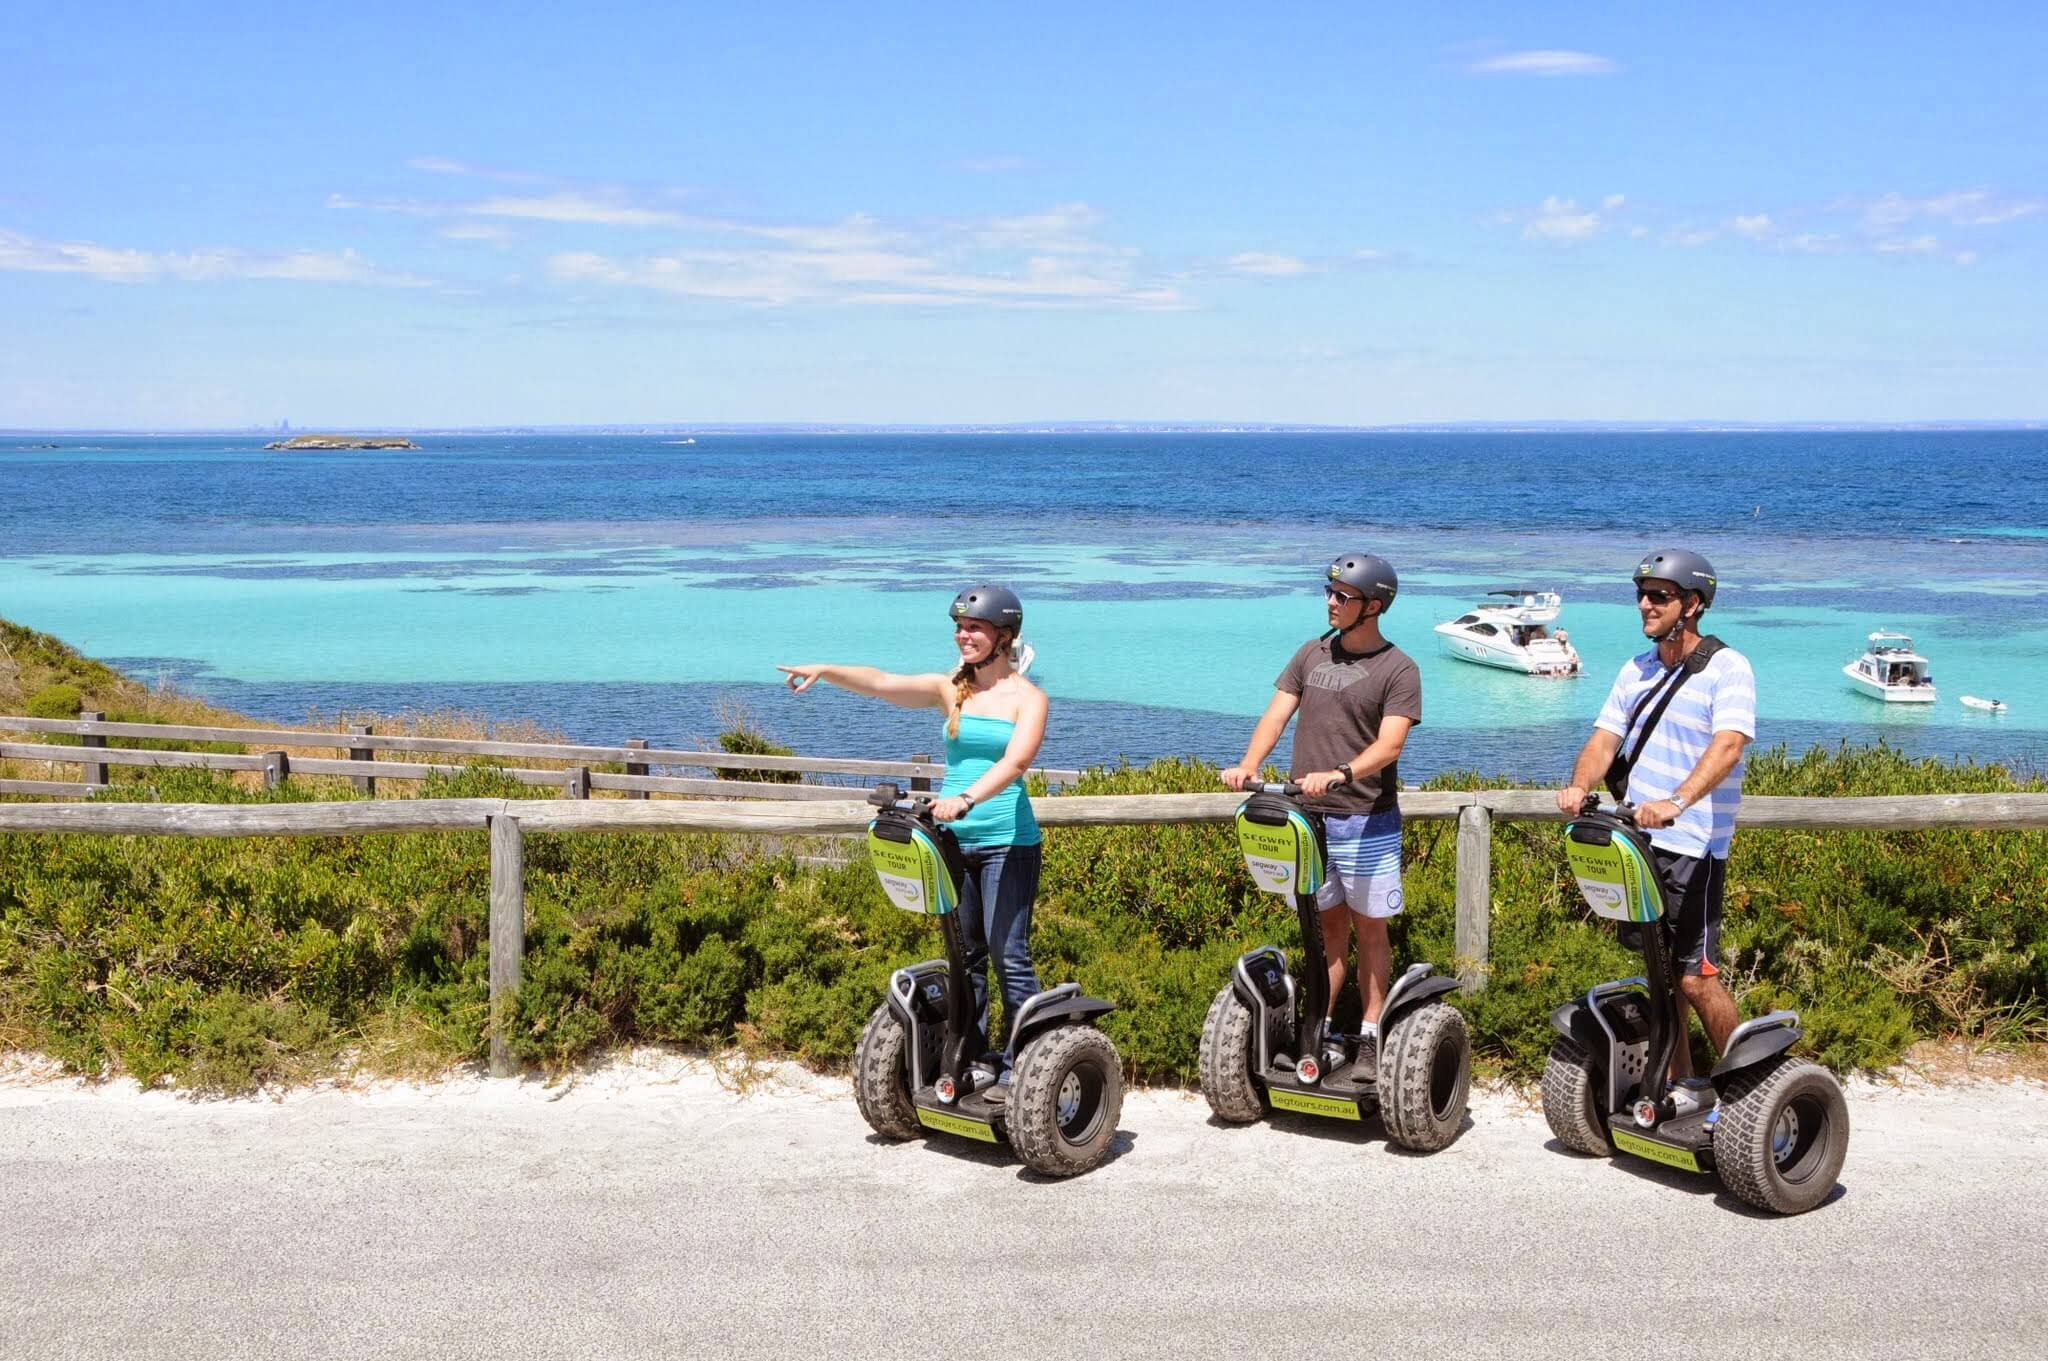 Explore Rottnest Island on a Segway for one of the best things to do